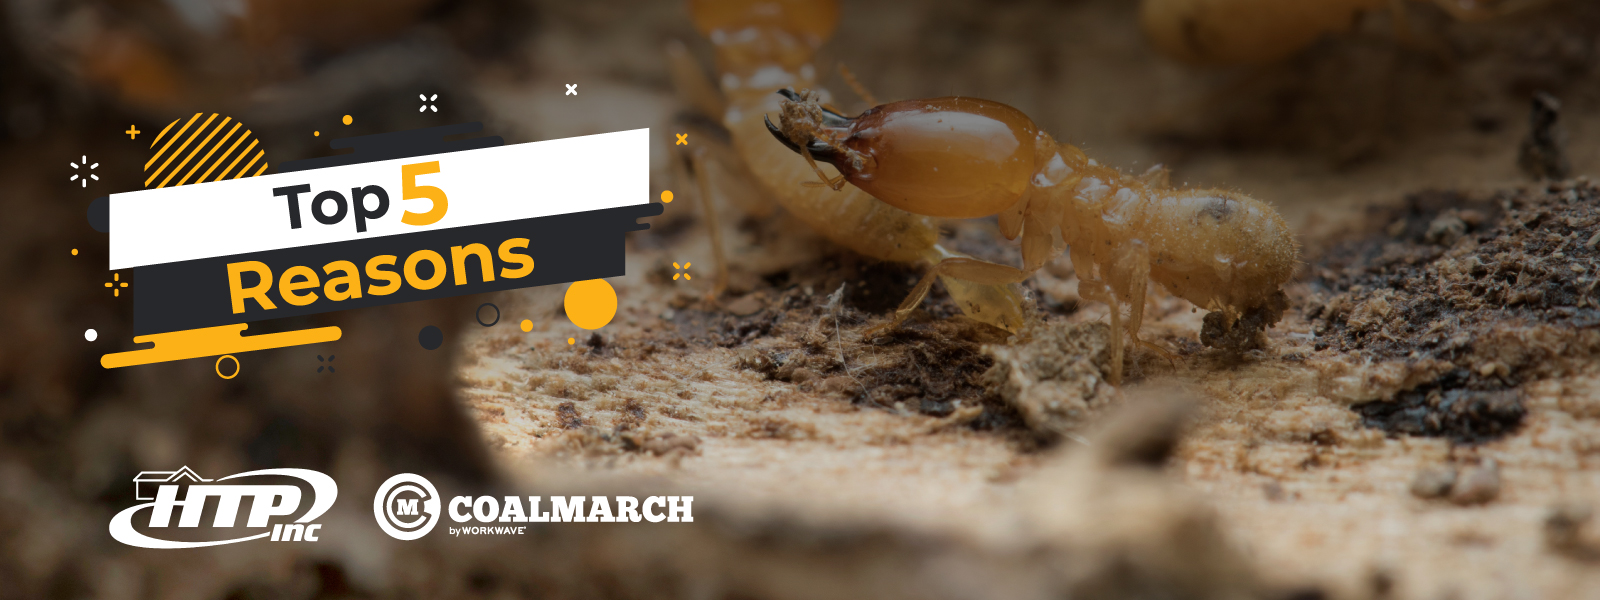 HTP Termite & Pest Control Loves Working With Coalmarch